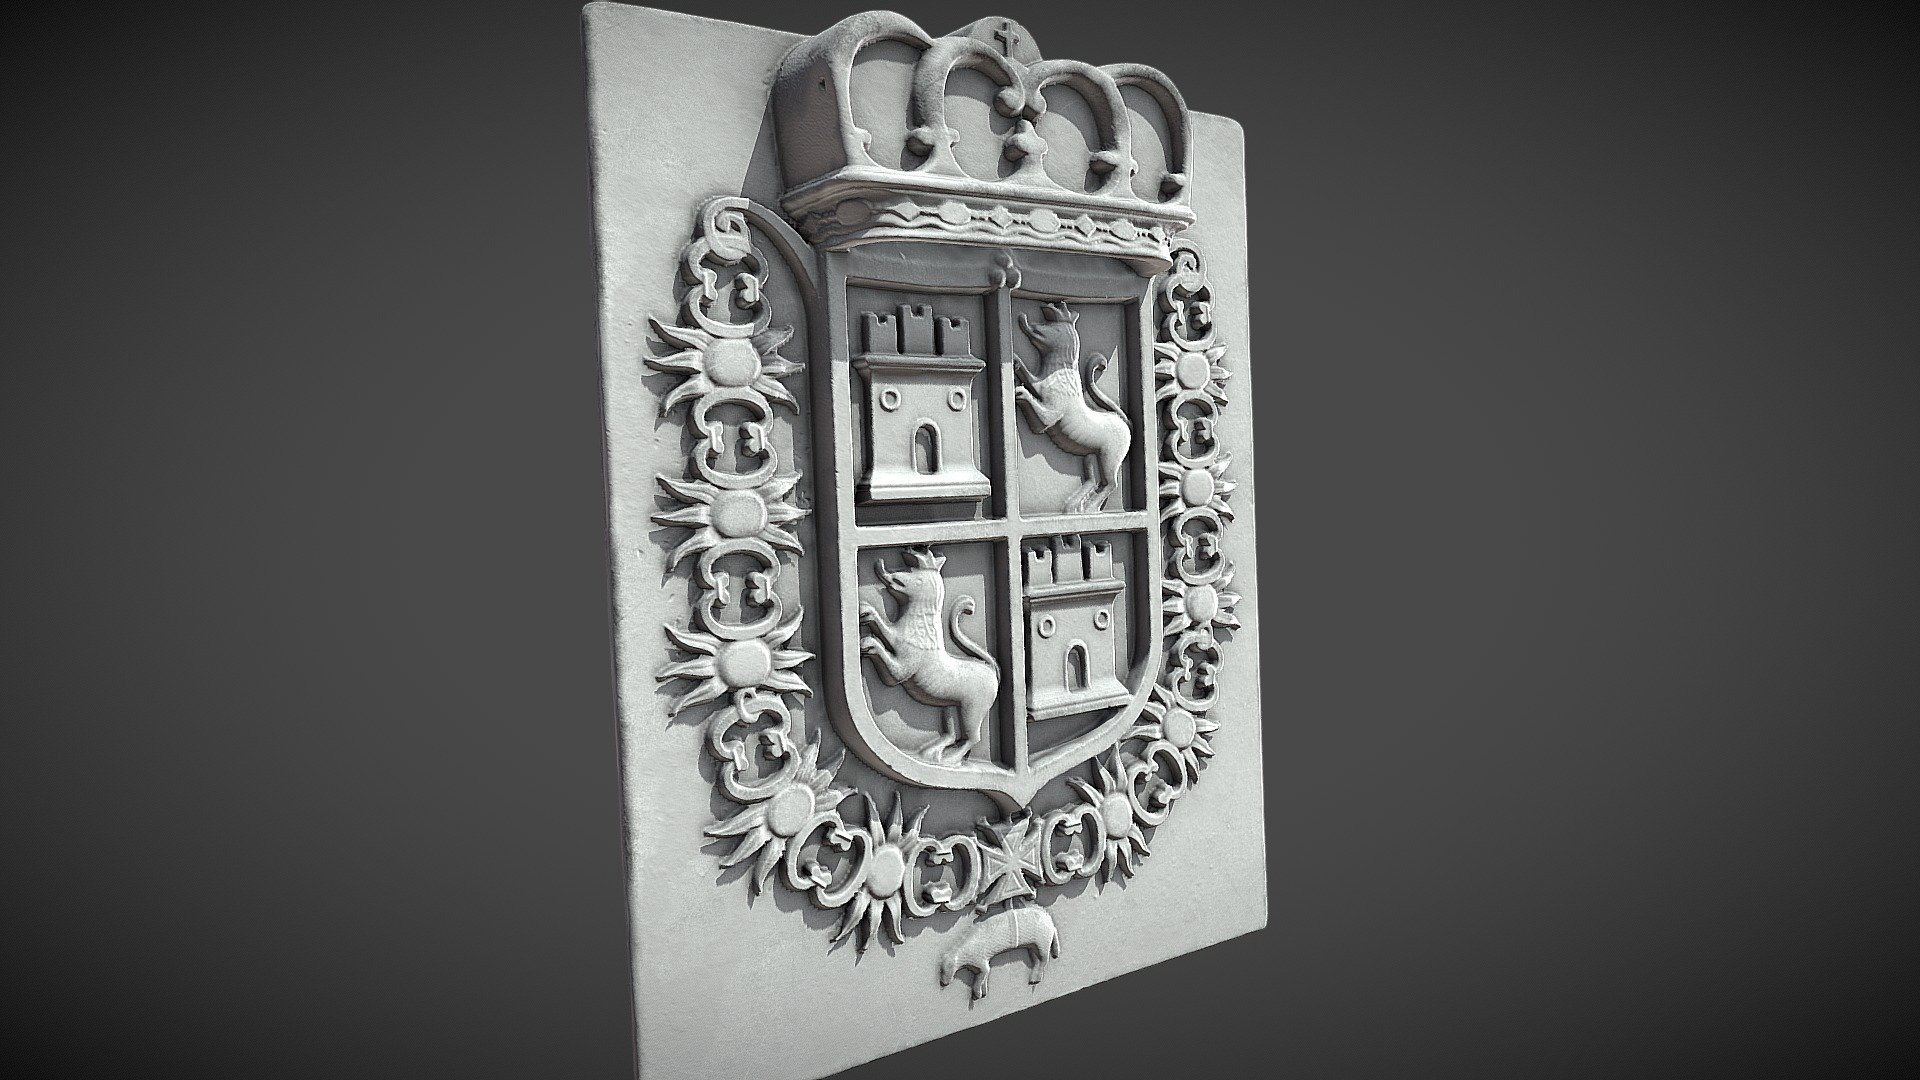 This is a laser scanned model of a historic replica coat of arms that is at the Castillo de San Marcos National Landmark in St. Augustine, Florida. The replica was scanned using a structured light instrument for purposes of making a mold casting of the piece to be used as part of a new wayside exhibit. The original coat of arms in the ravelin portion of the fort was removed in 1960, with this epoxy fiberglass model installed in its place to preserve the fragile stuccoed original. 

![http://www.flickr.com/photos/aist/40928890075/sizes/c/] - Spanish Coat Of Arms at Castillo de San Marcos - 3D model by University of South Florida Libraries (@USF_digital) 3d model